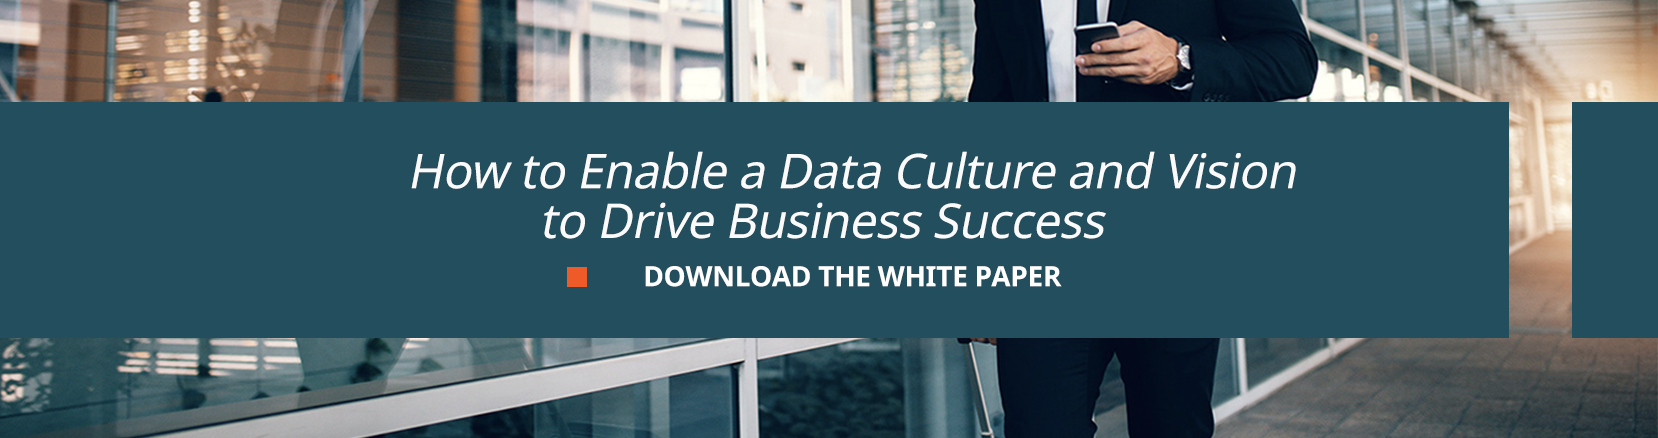 how to enable a data culture and vision to drive business success